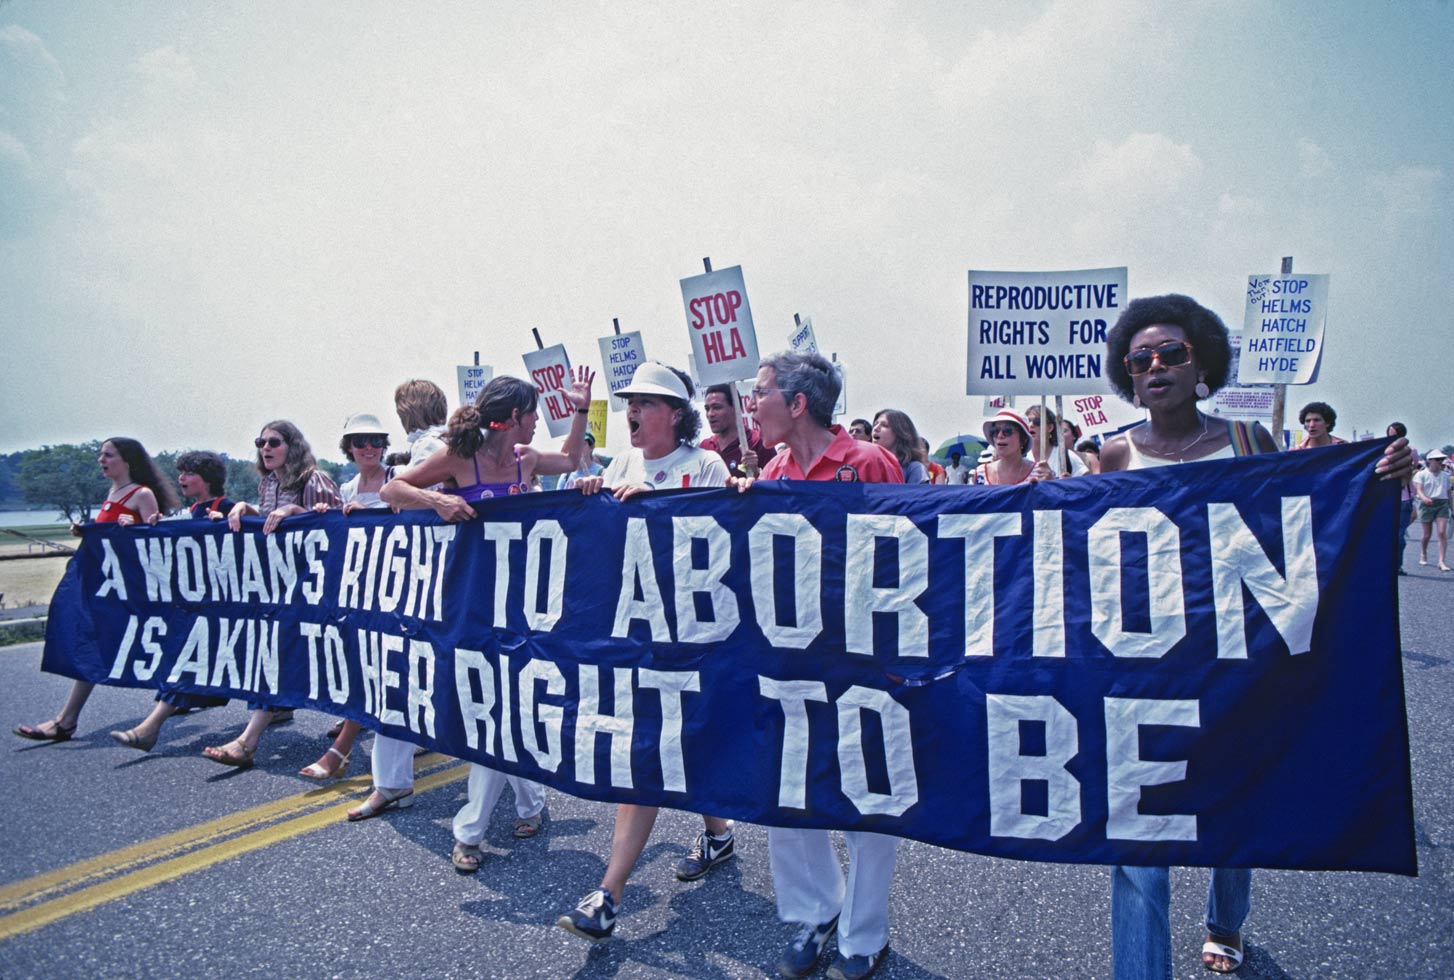 Pro-Choice March & Rally for Abortion Rights
Cherry Hill, New Jersey, July 1982